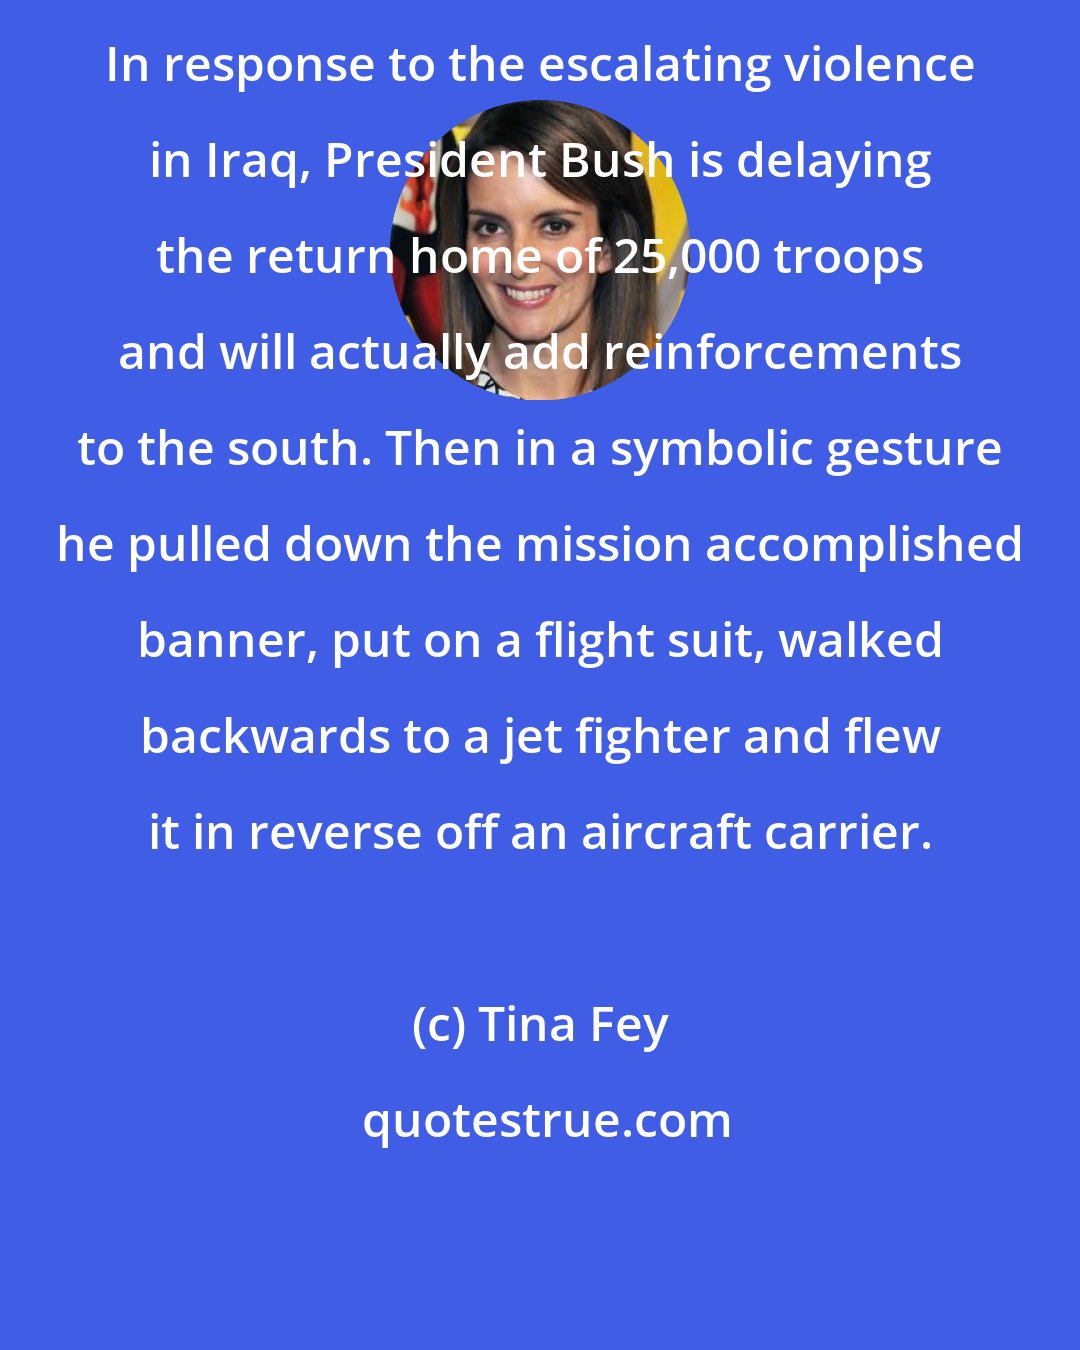 Tina Fey: In response to the escalating violence in Iraq, President Bush is delaying the return home of 25,000 troops and will actually add reinforcements to the south. Then in a symbolic gesture he pulled down the mission accomplished banner, put on a flight suit, walked backwards to a jet fighter and flew it in reverse off an aircraft carrier.